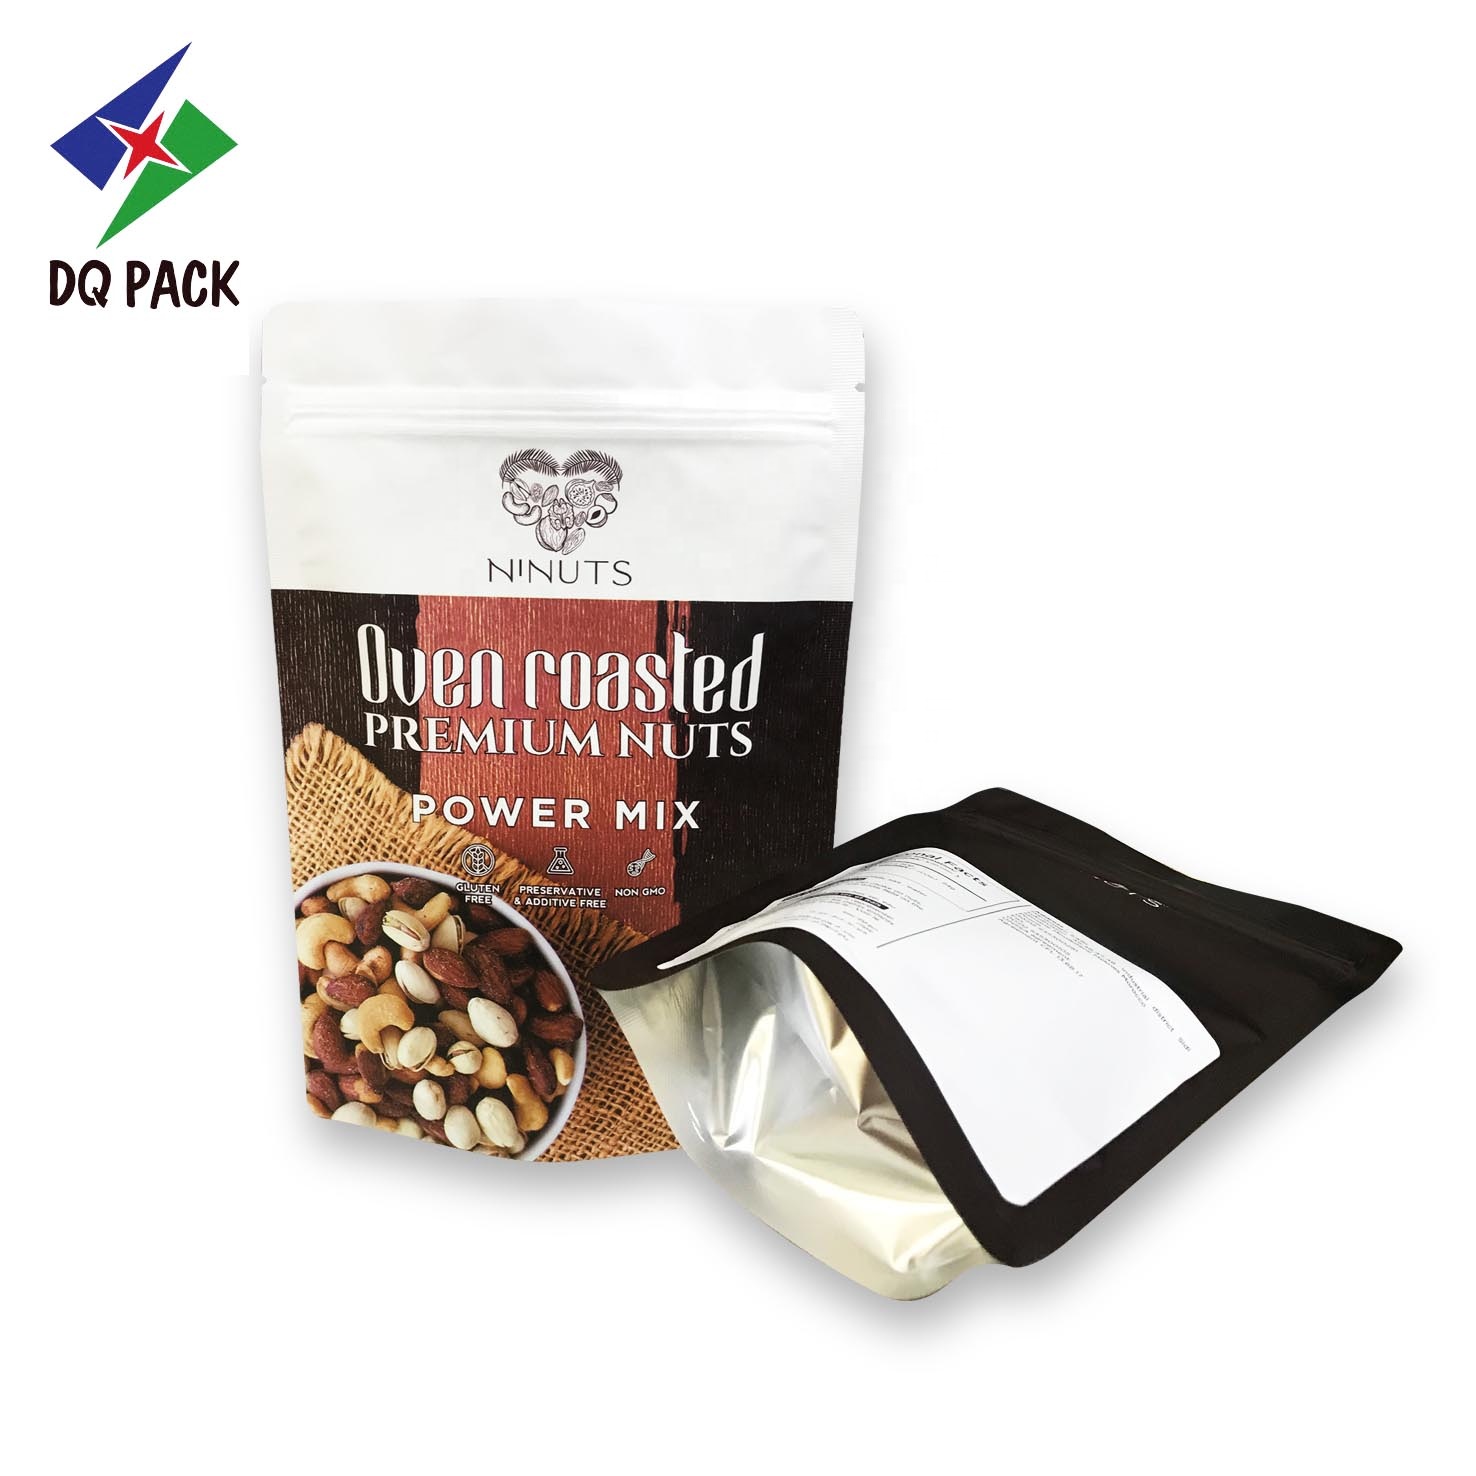 DQ PACK Moisture Proof Stand Up Pouch Resealable zipper ziplock pouch bag for nuts and snack food packaging